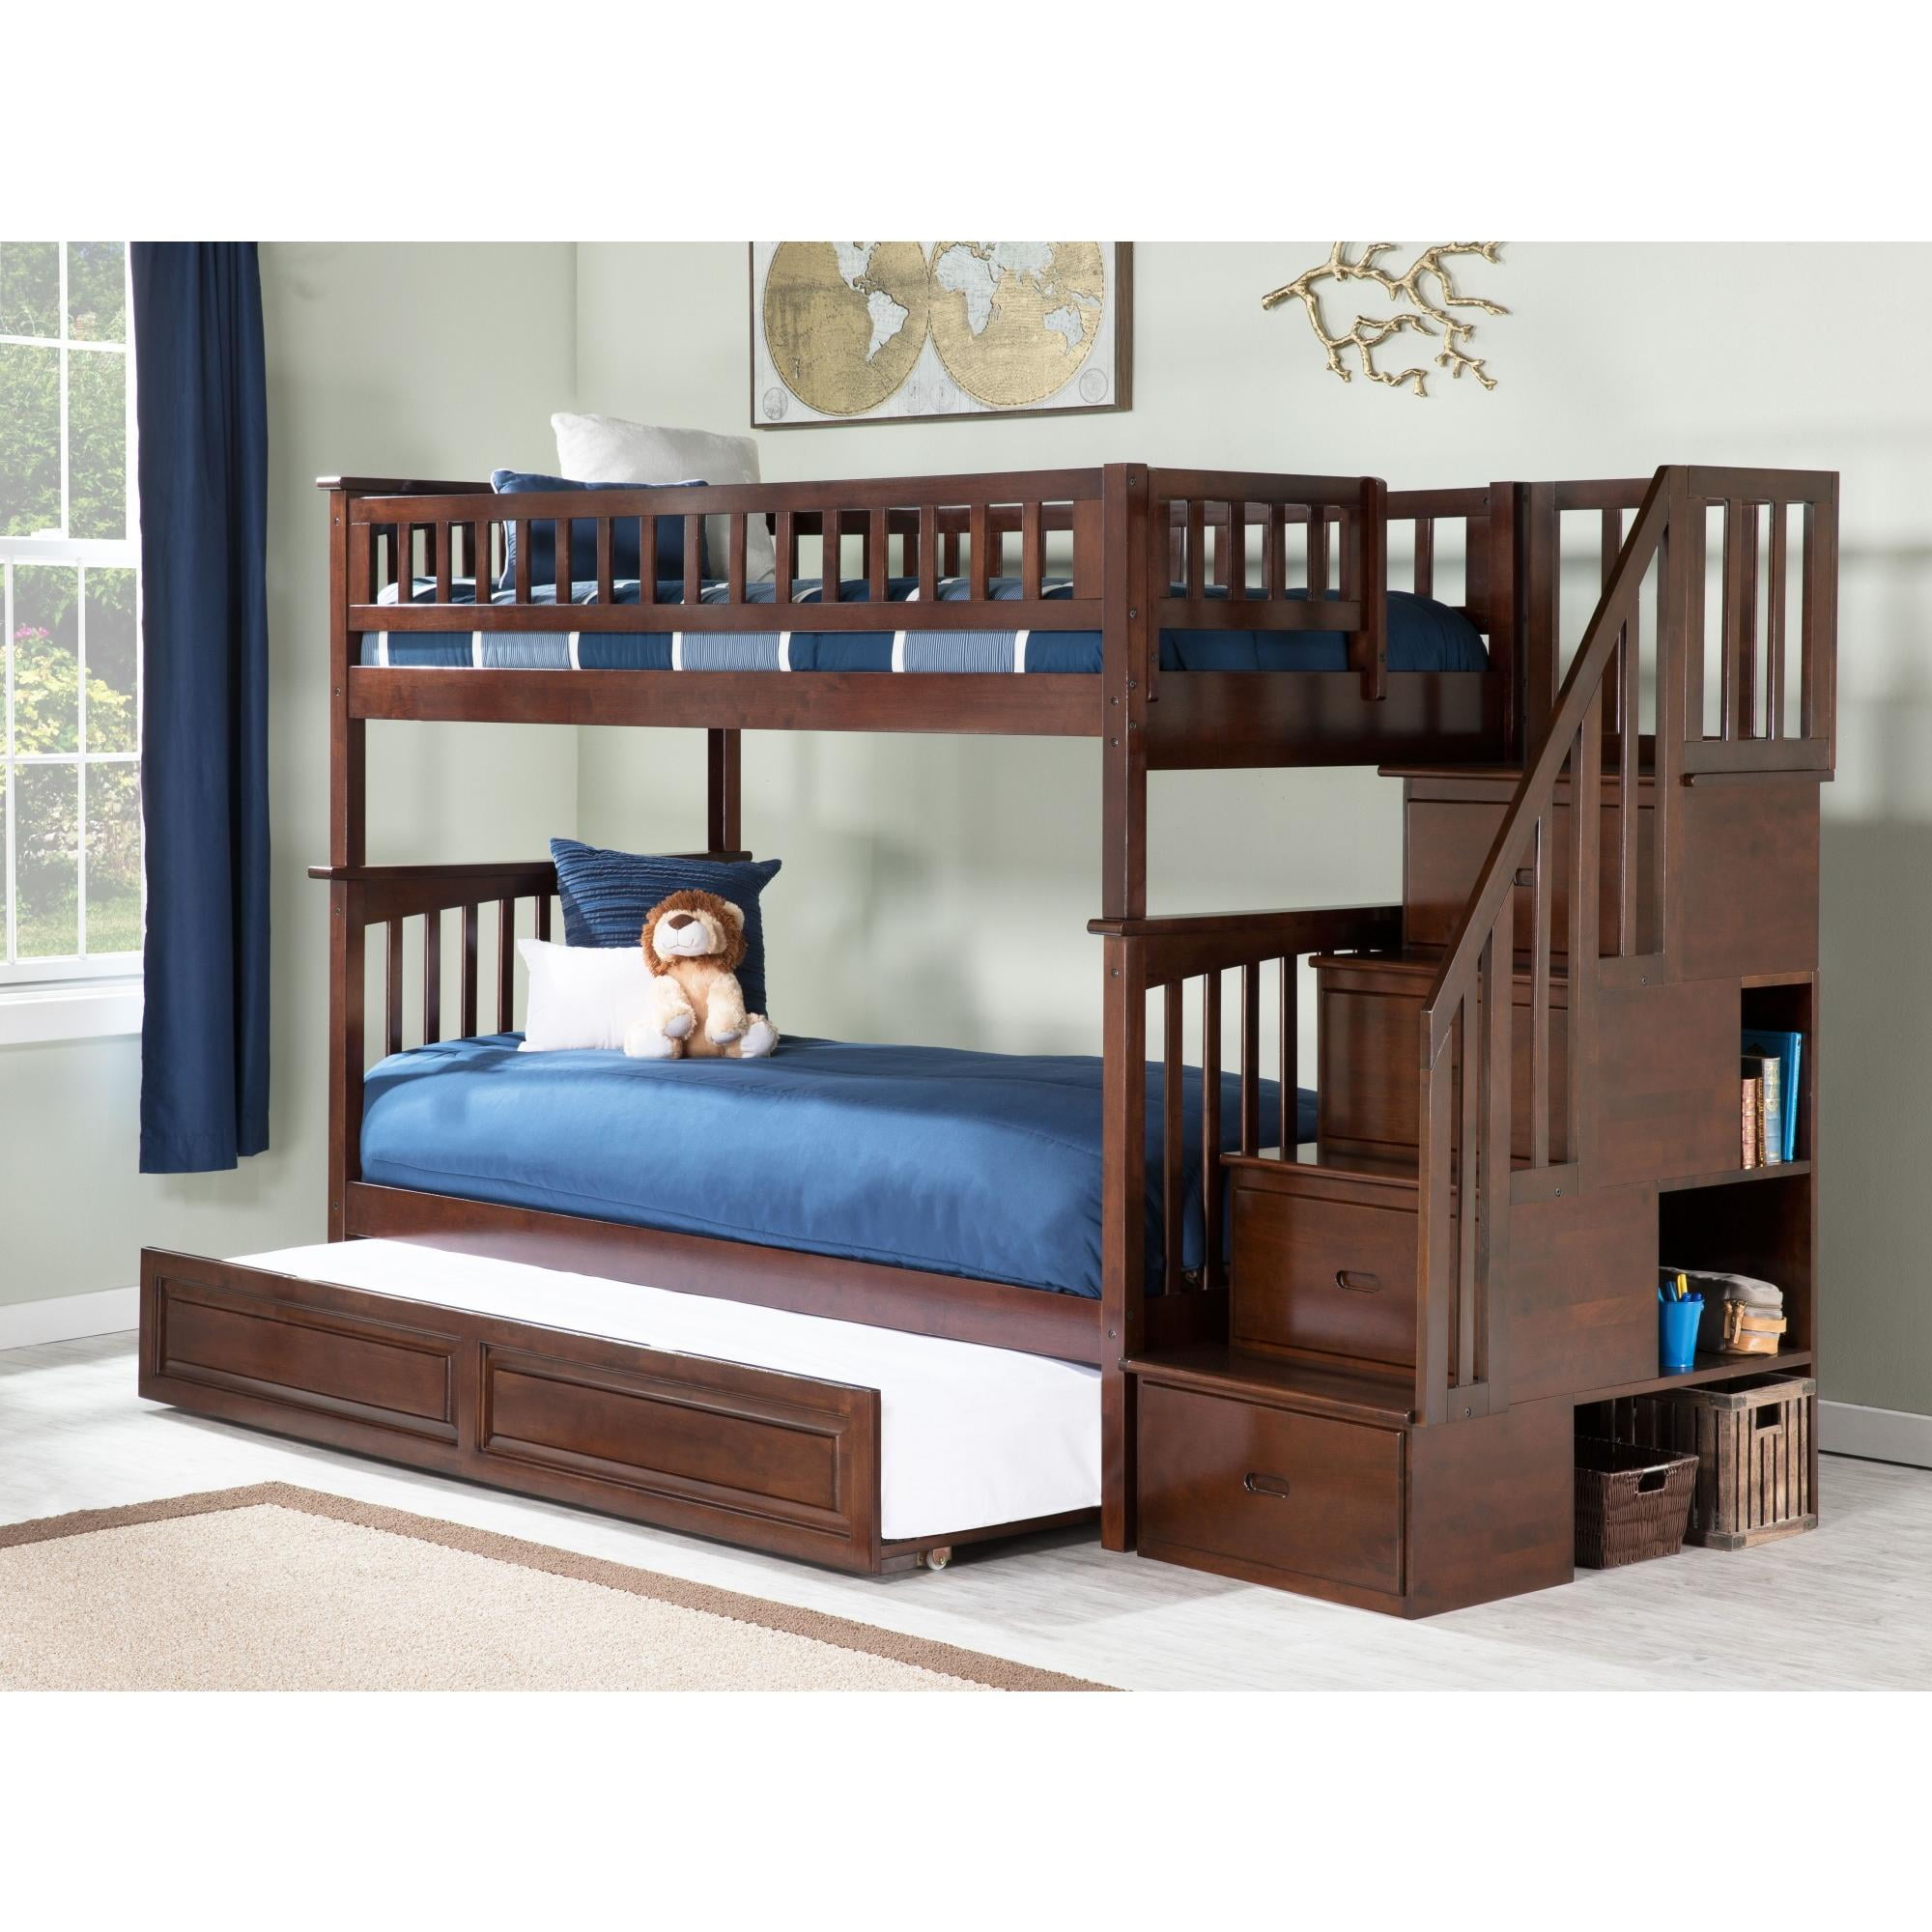 Picture of Atlantic Furniture AB55634 Columbia Staircase Bunkbed with Raised Panel Trundle Bed, Twin over Twin Size - Antique Walnut